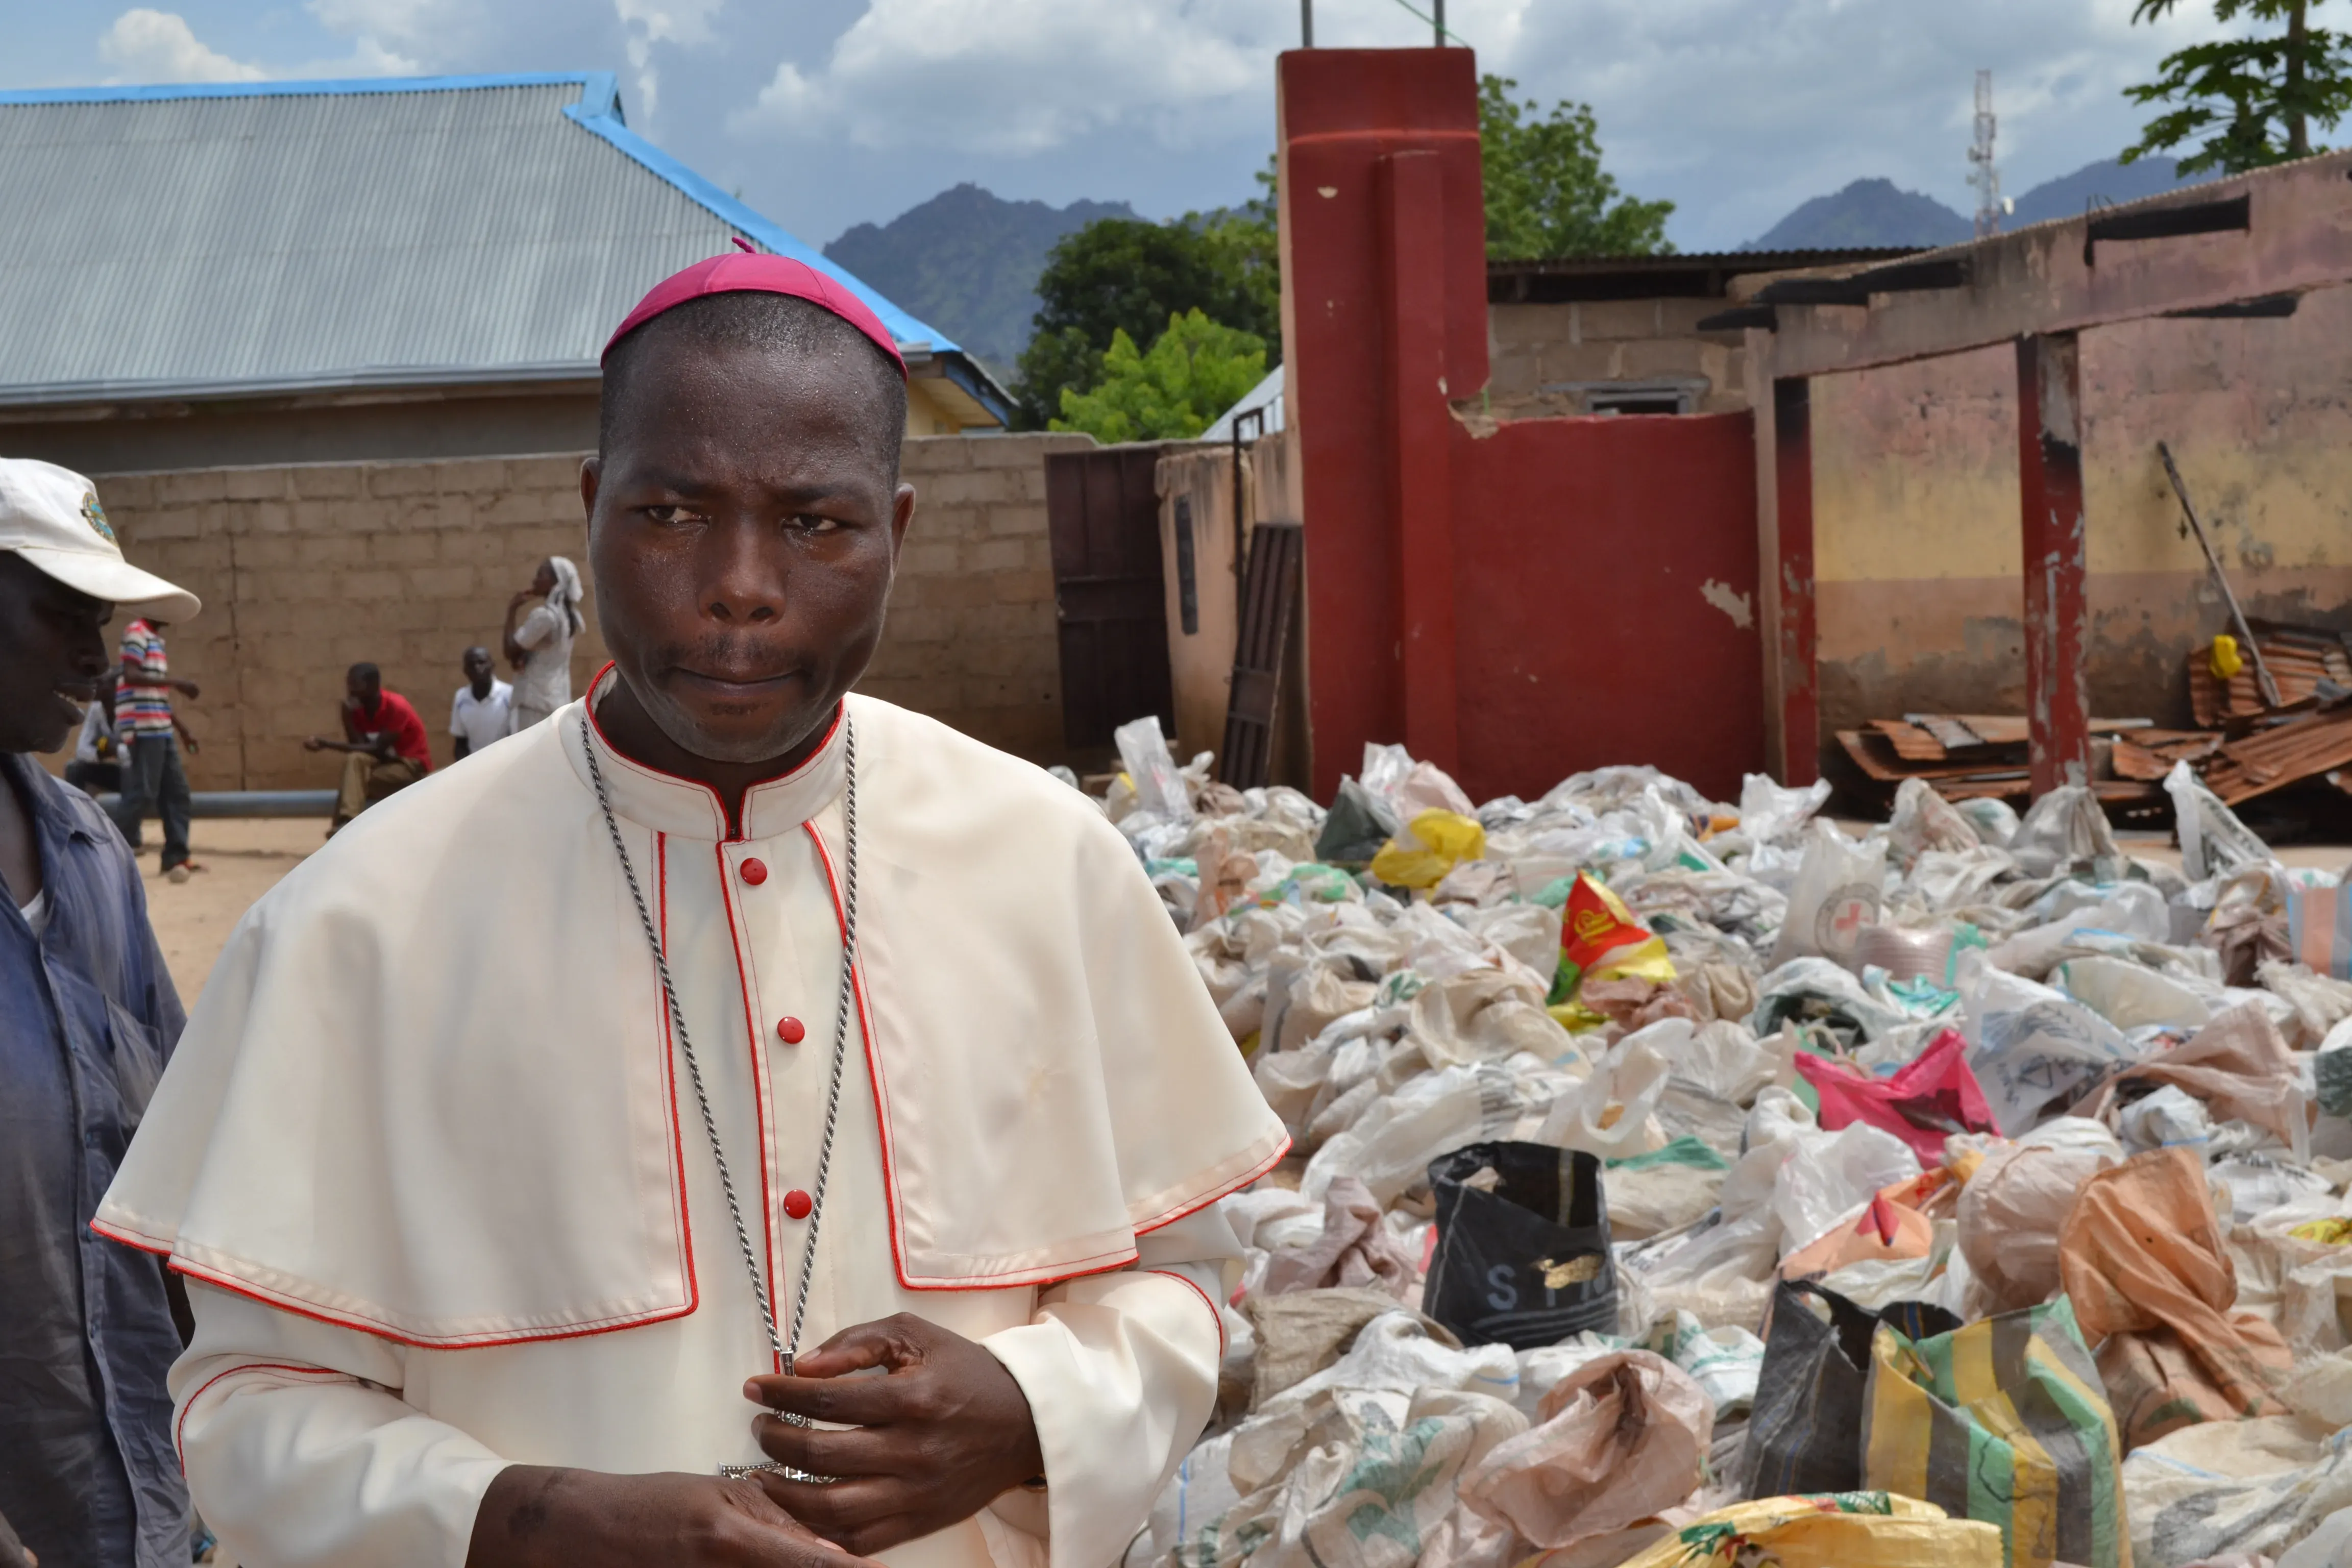 Bishop Stephen Dami Mamza of the Diocese of Yola, pictured in 2015. Ogalaemmauel/CC BY-SA 4.0